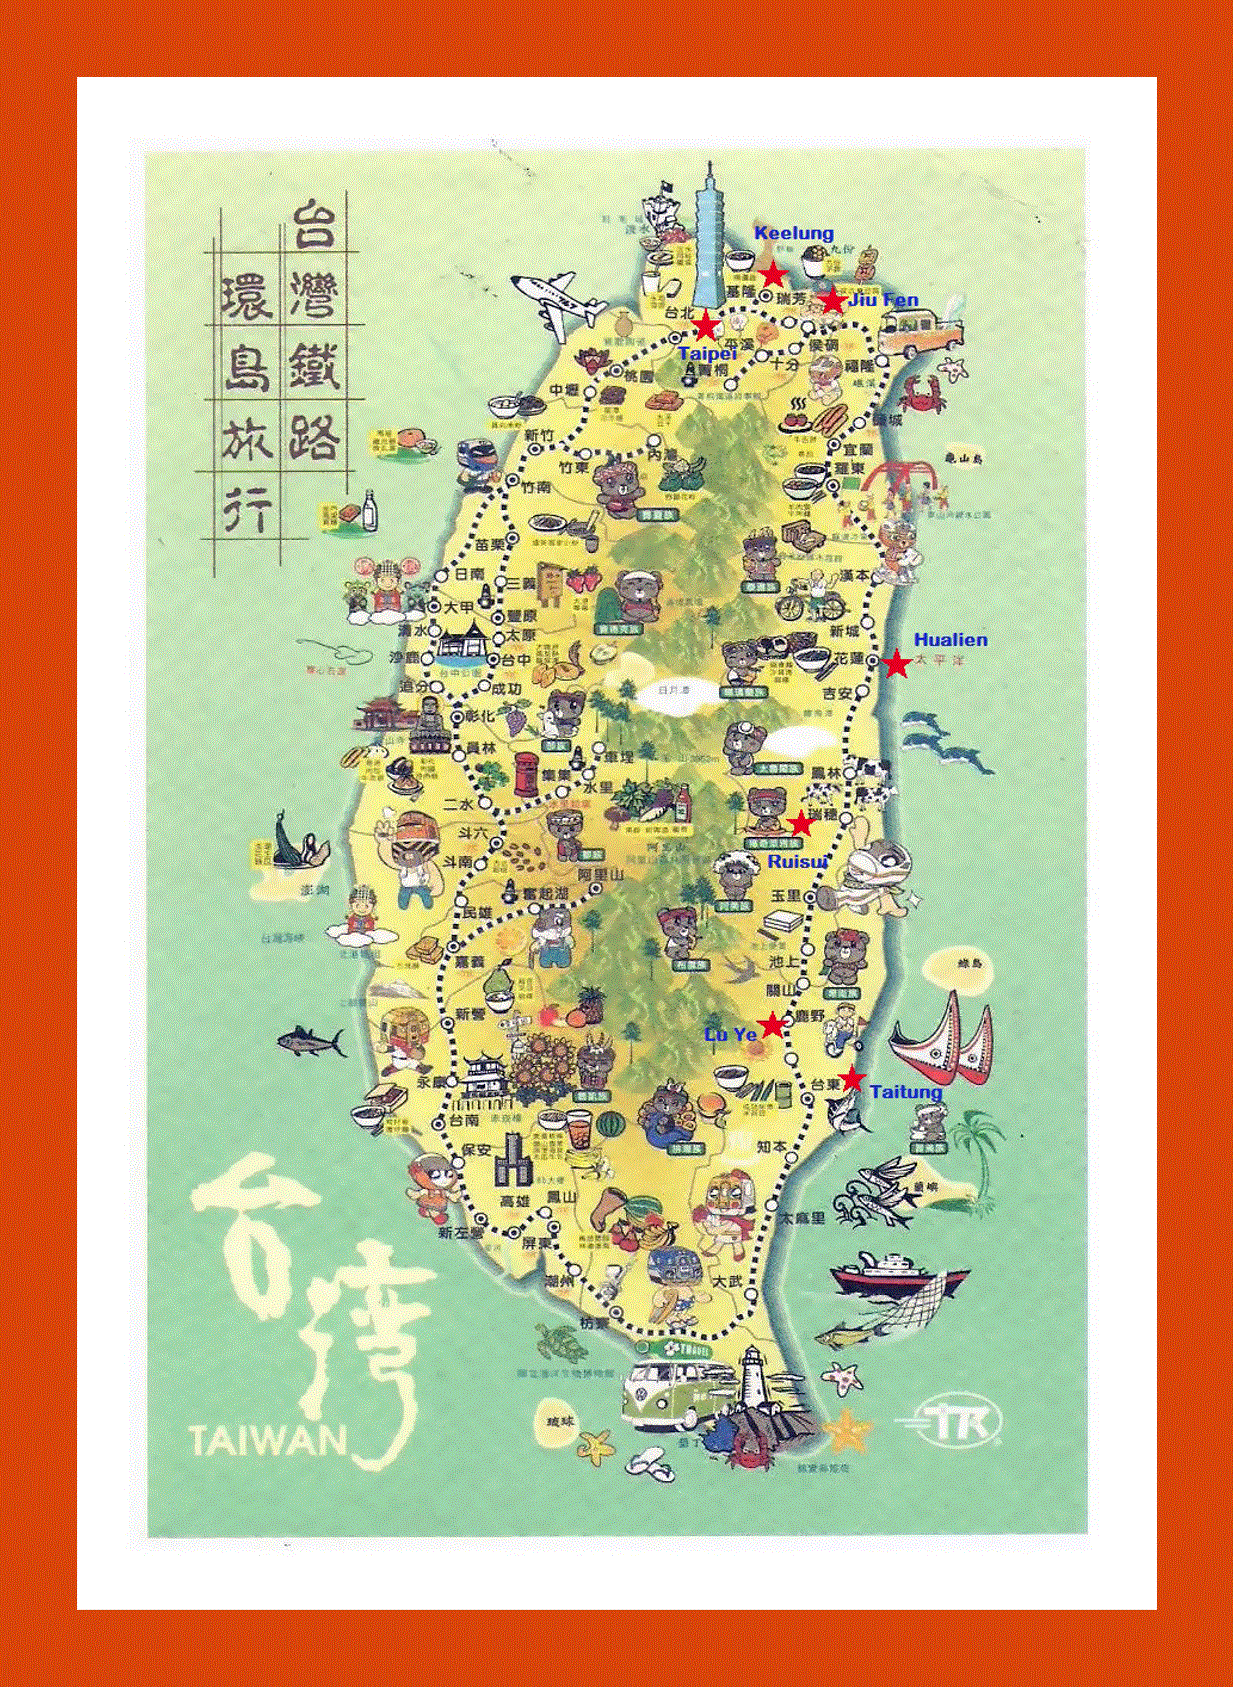 Tourist illustrated map of Taiwan